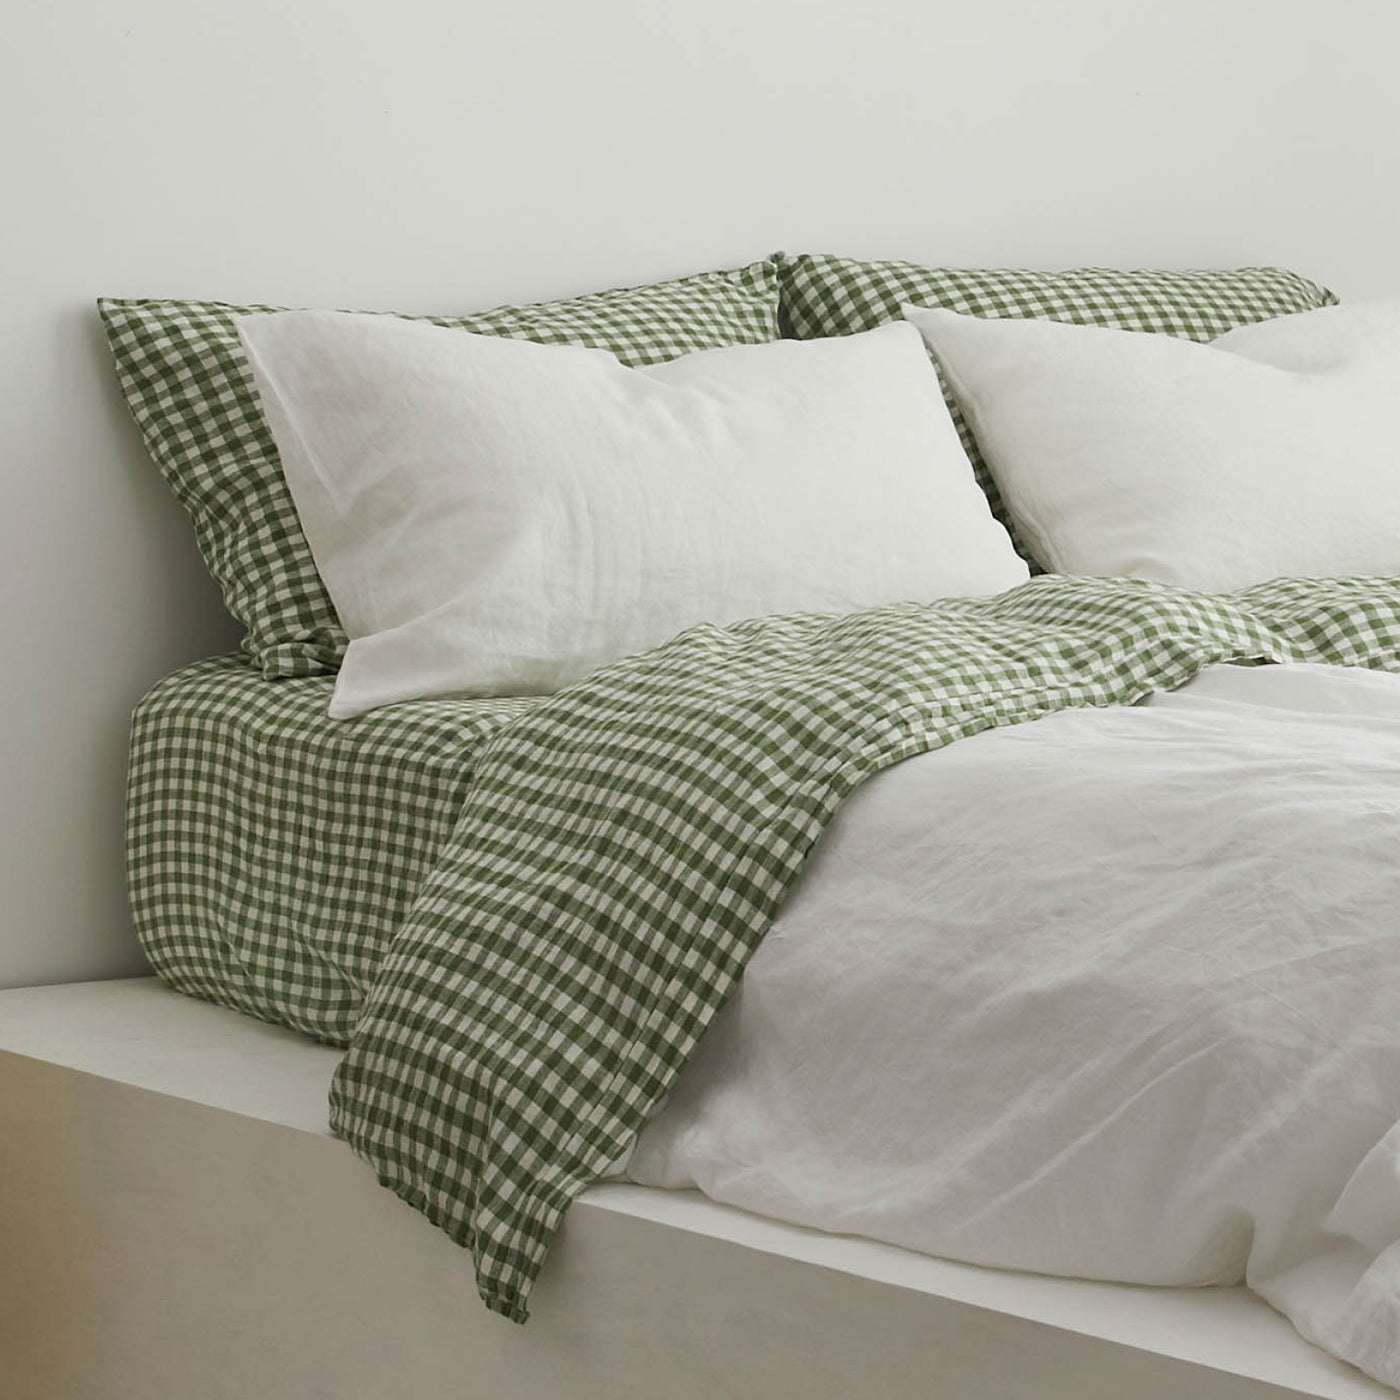 French Flax Linen Flat Sheet in Ivy Gingham